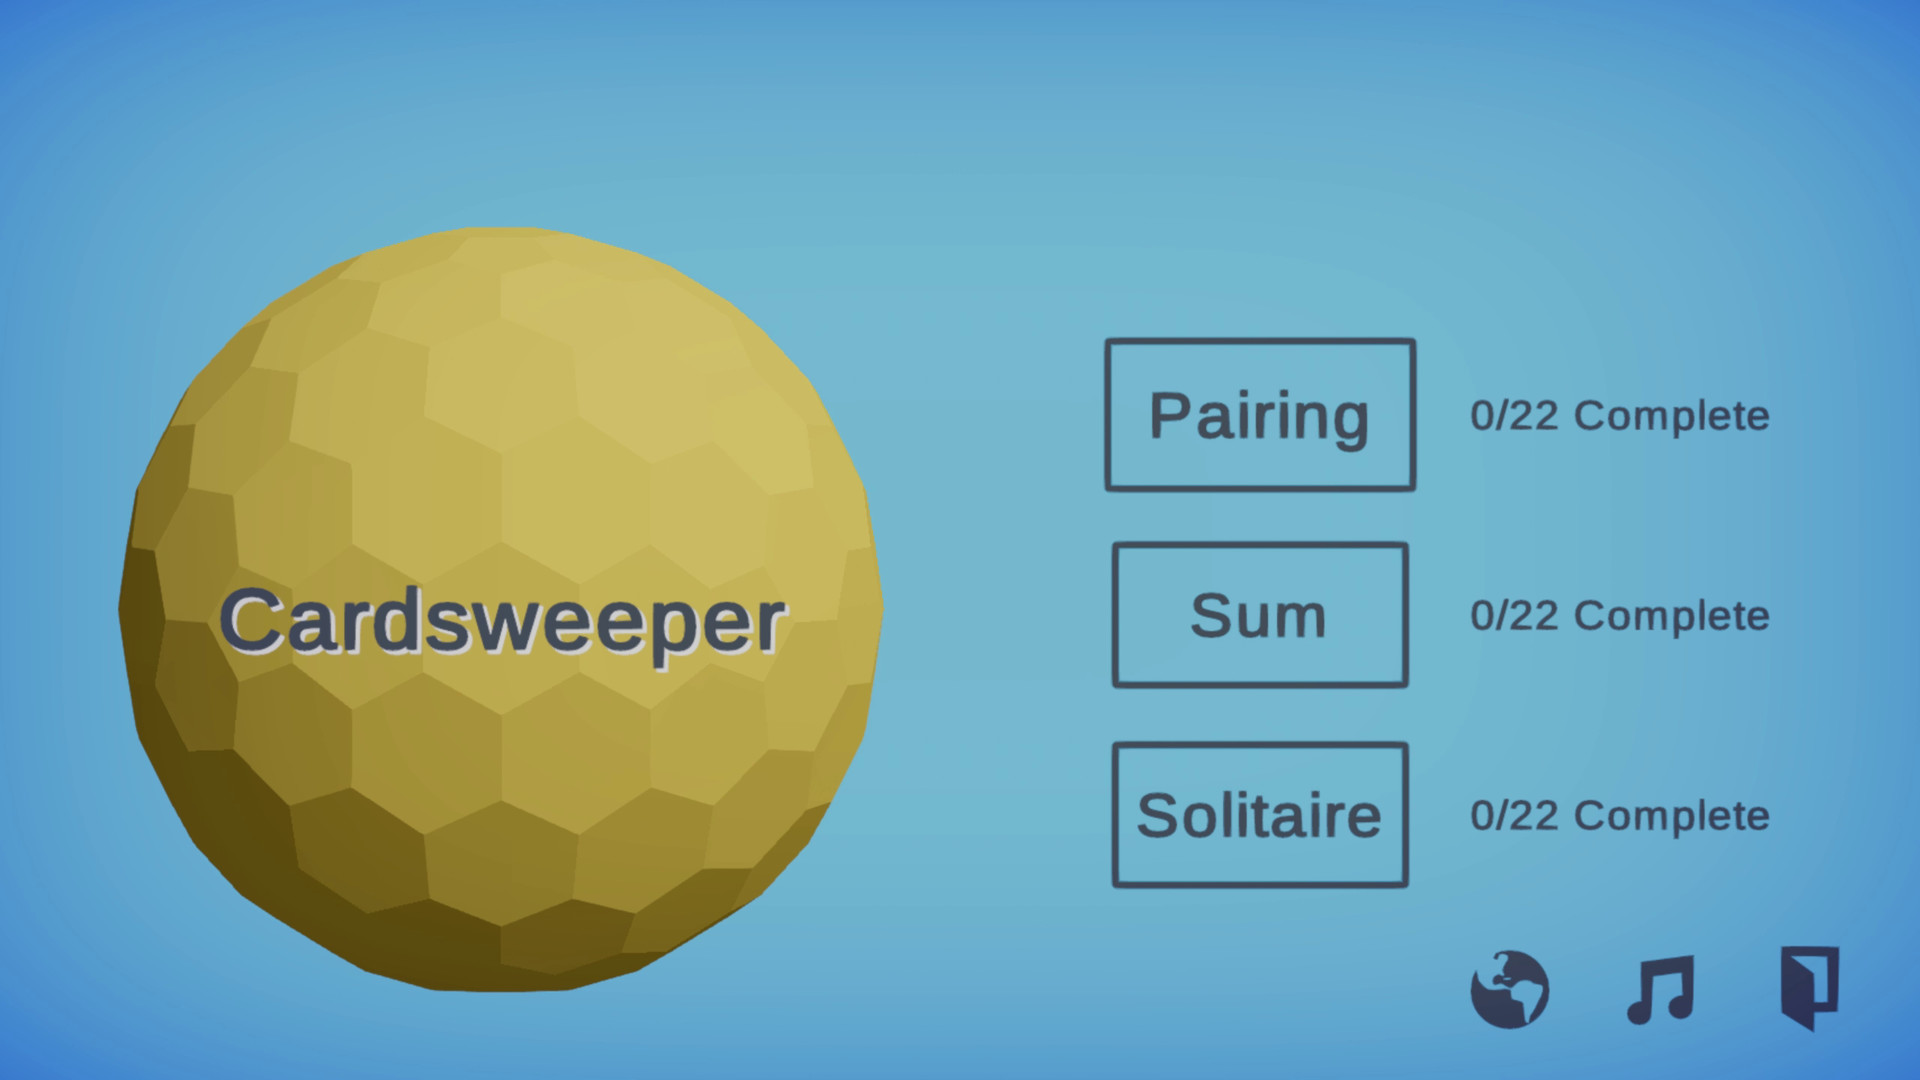 Cardsweeper Free Download